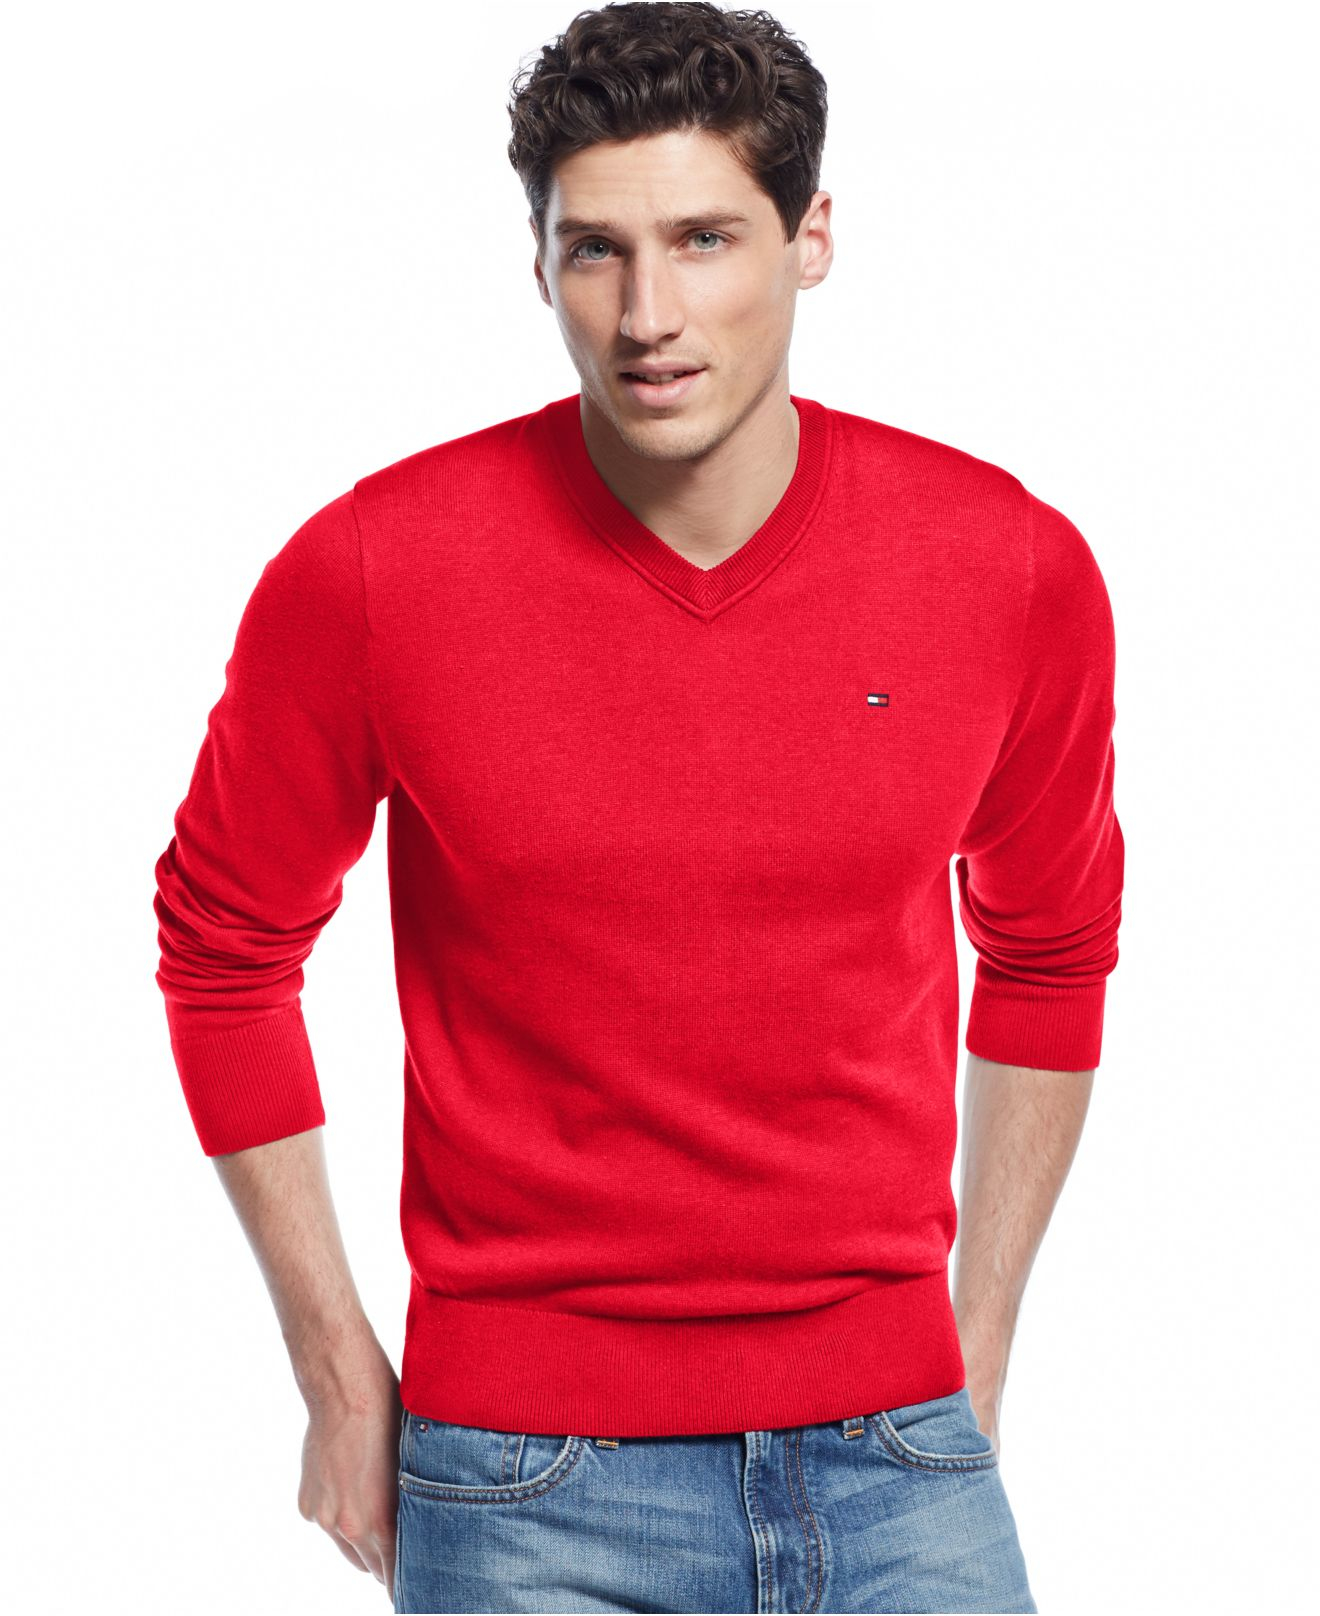 Lyst - Tommy Hilfiger Signature Solid V-neck Sweater in Red for Men